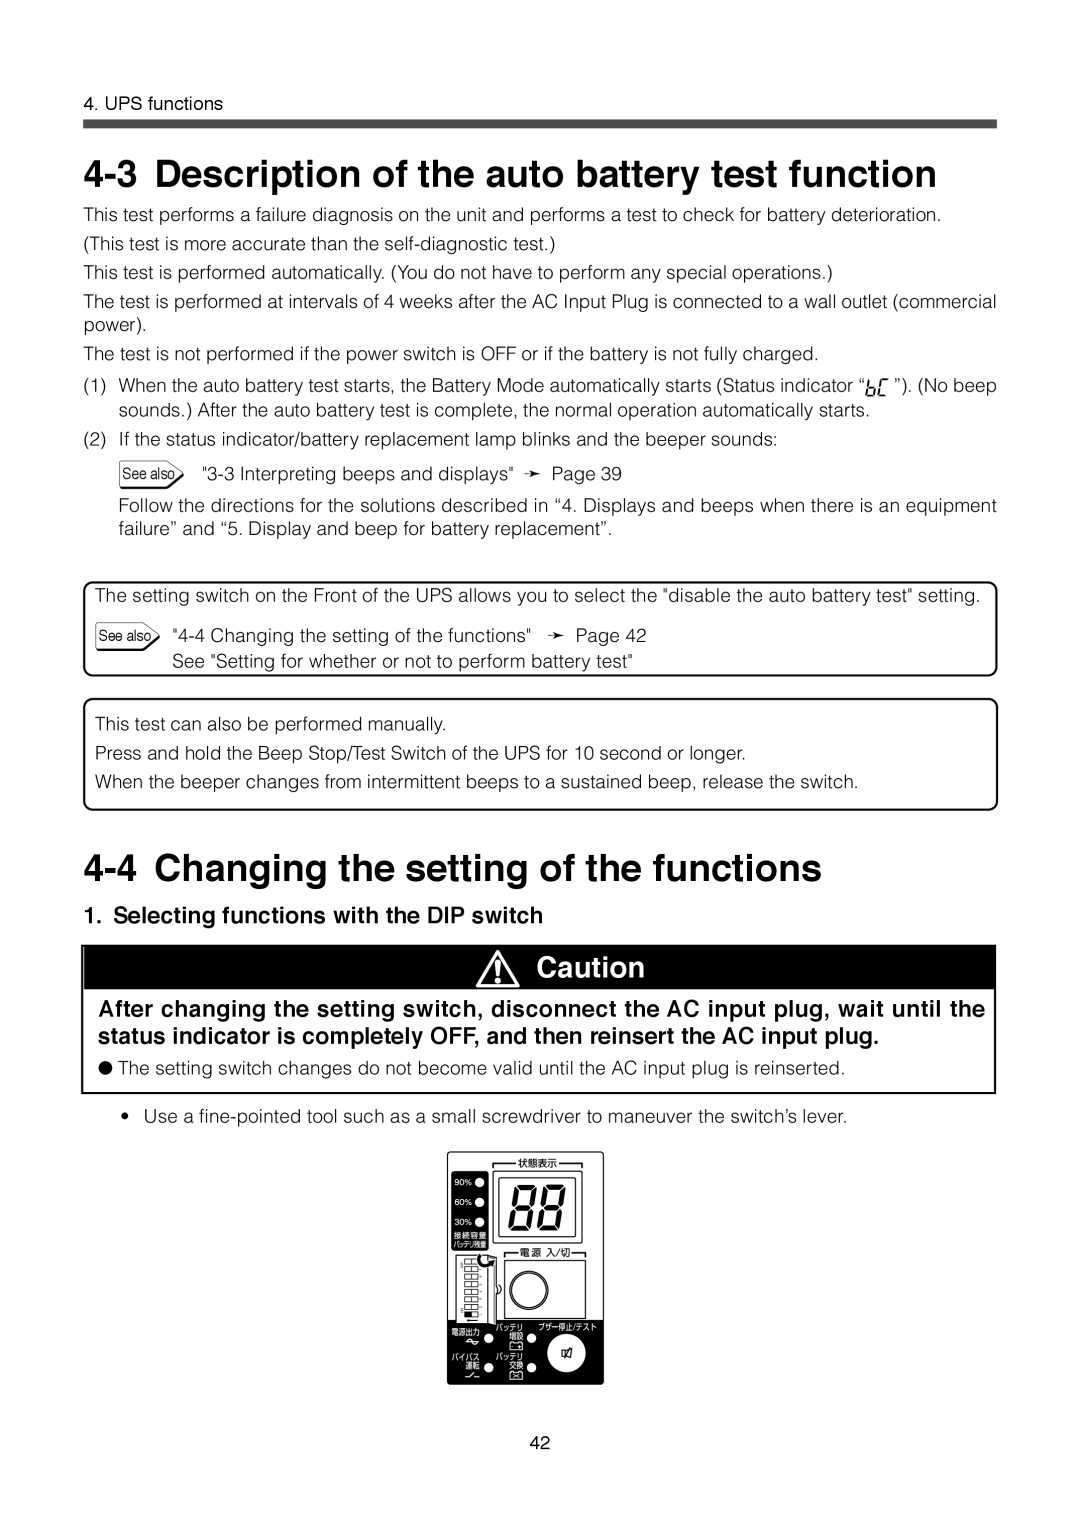 Omron BU3002SW, BU1002SW specifications Description of the auto battery test function, Changing the setting of the functions 